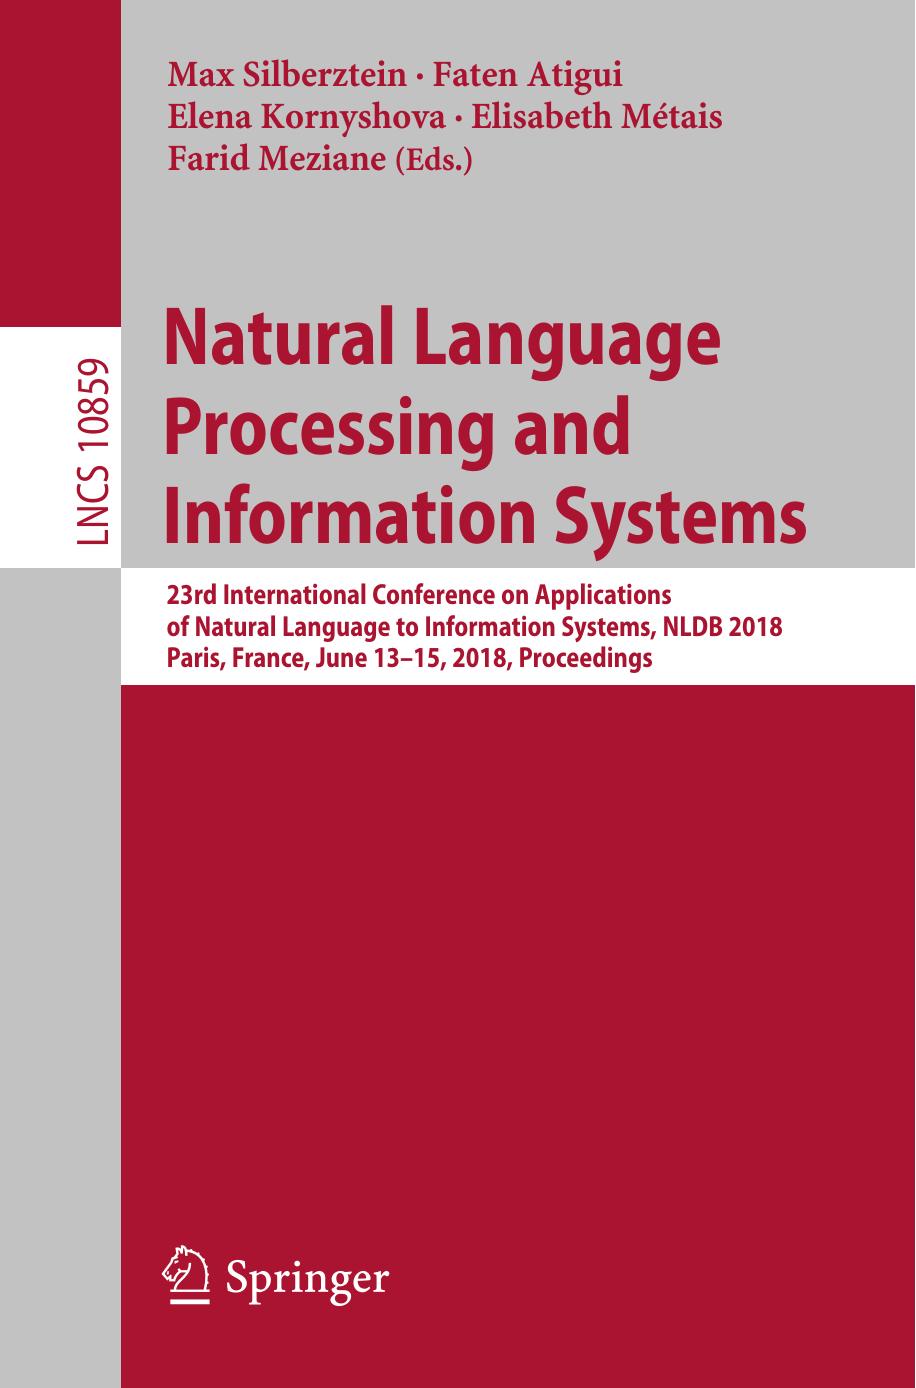 Natural Language Processing and Information Systems: 23rd International Conference on Applications of Natural Language to Information Systems, NLDB 2018, Paris, France, June 13-15, 2018, Proceedings